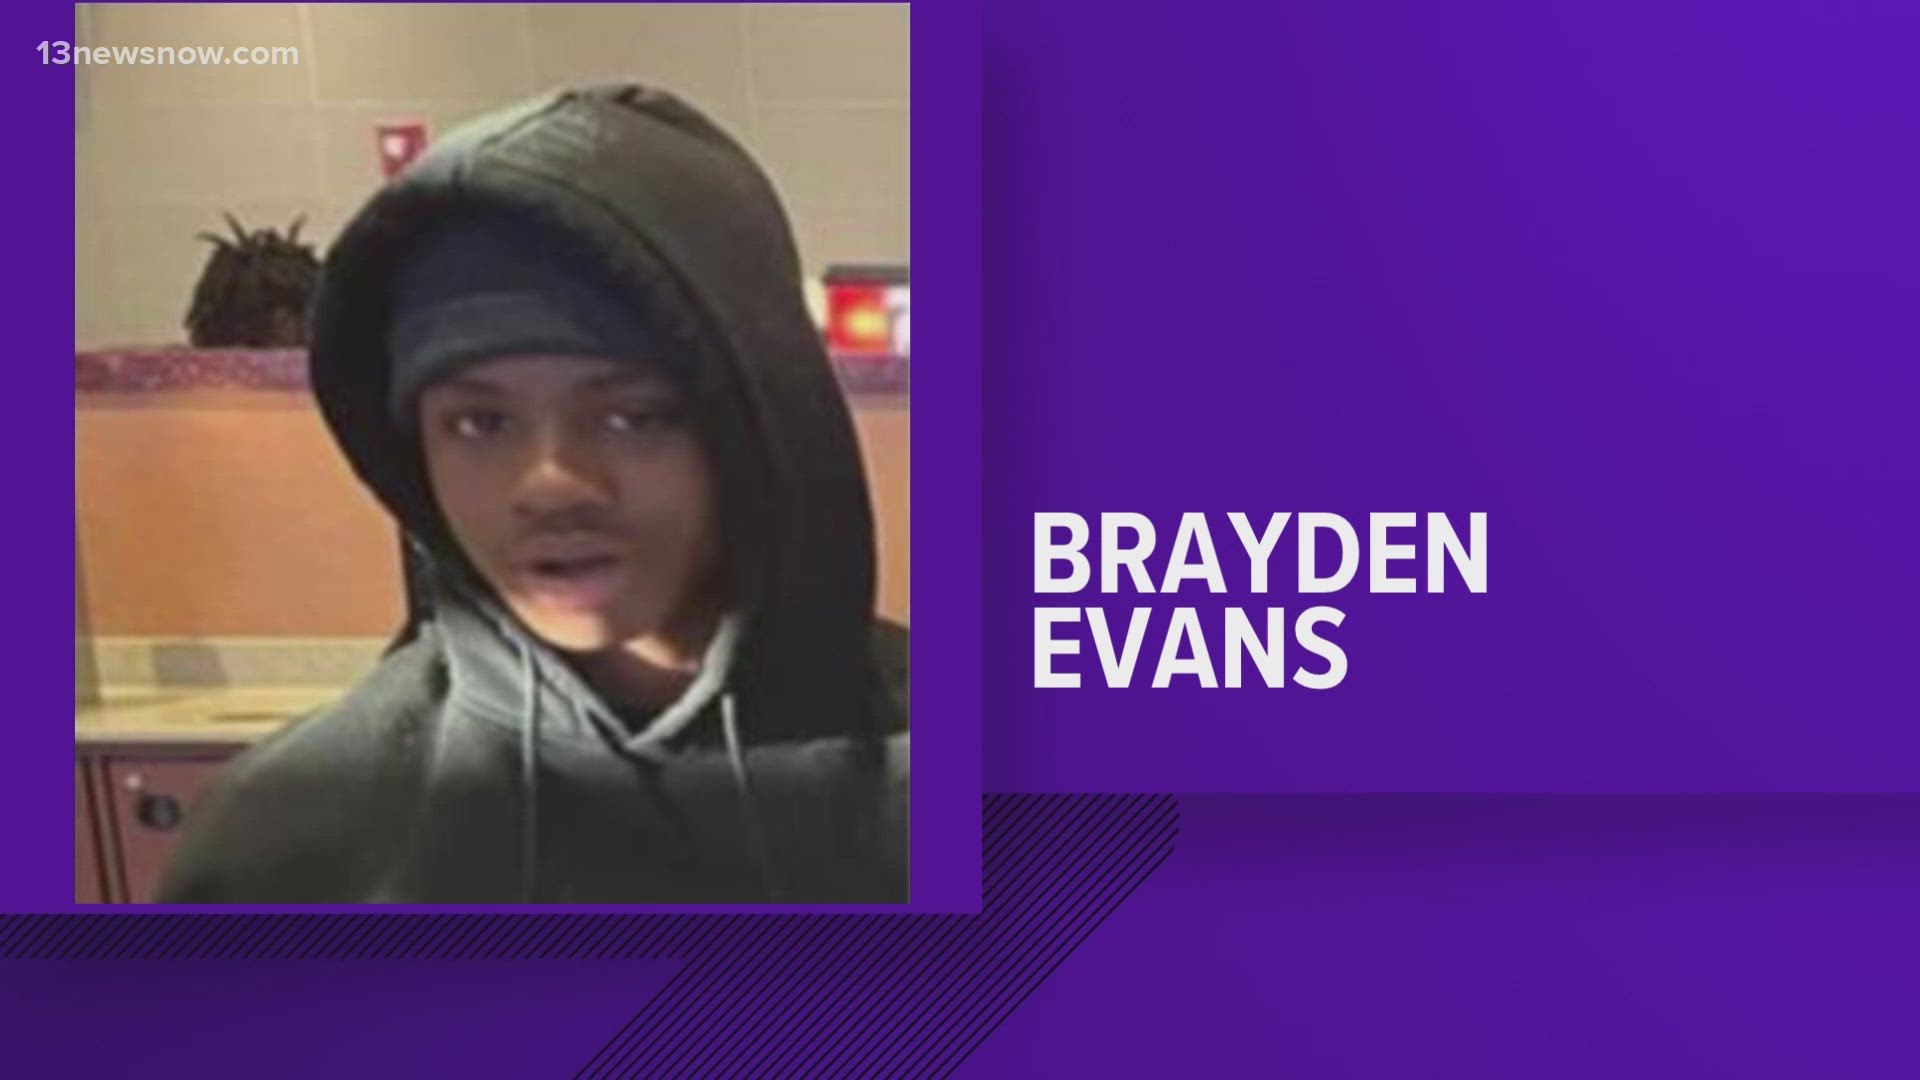 According to police, 13-year-old Brayden Evans left a home in the 1100 block of Railroad Avenue Monday and has not been heard from or seen since.